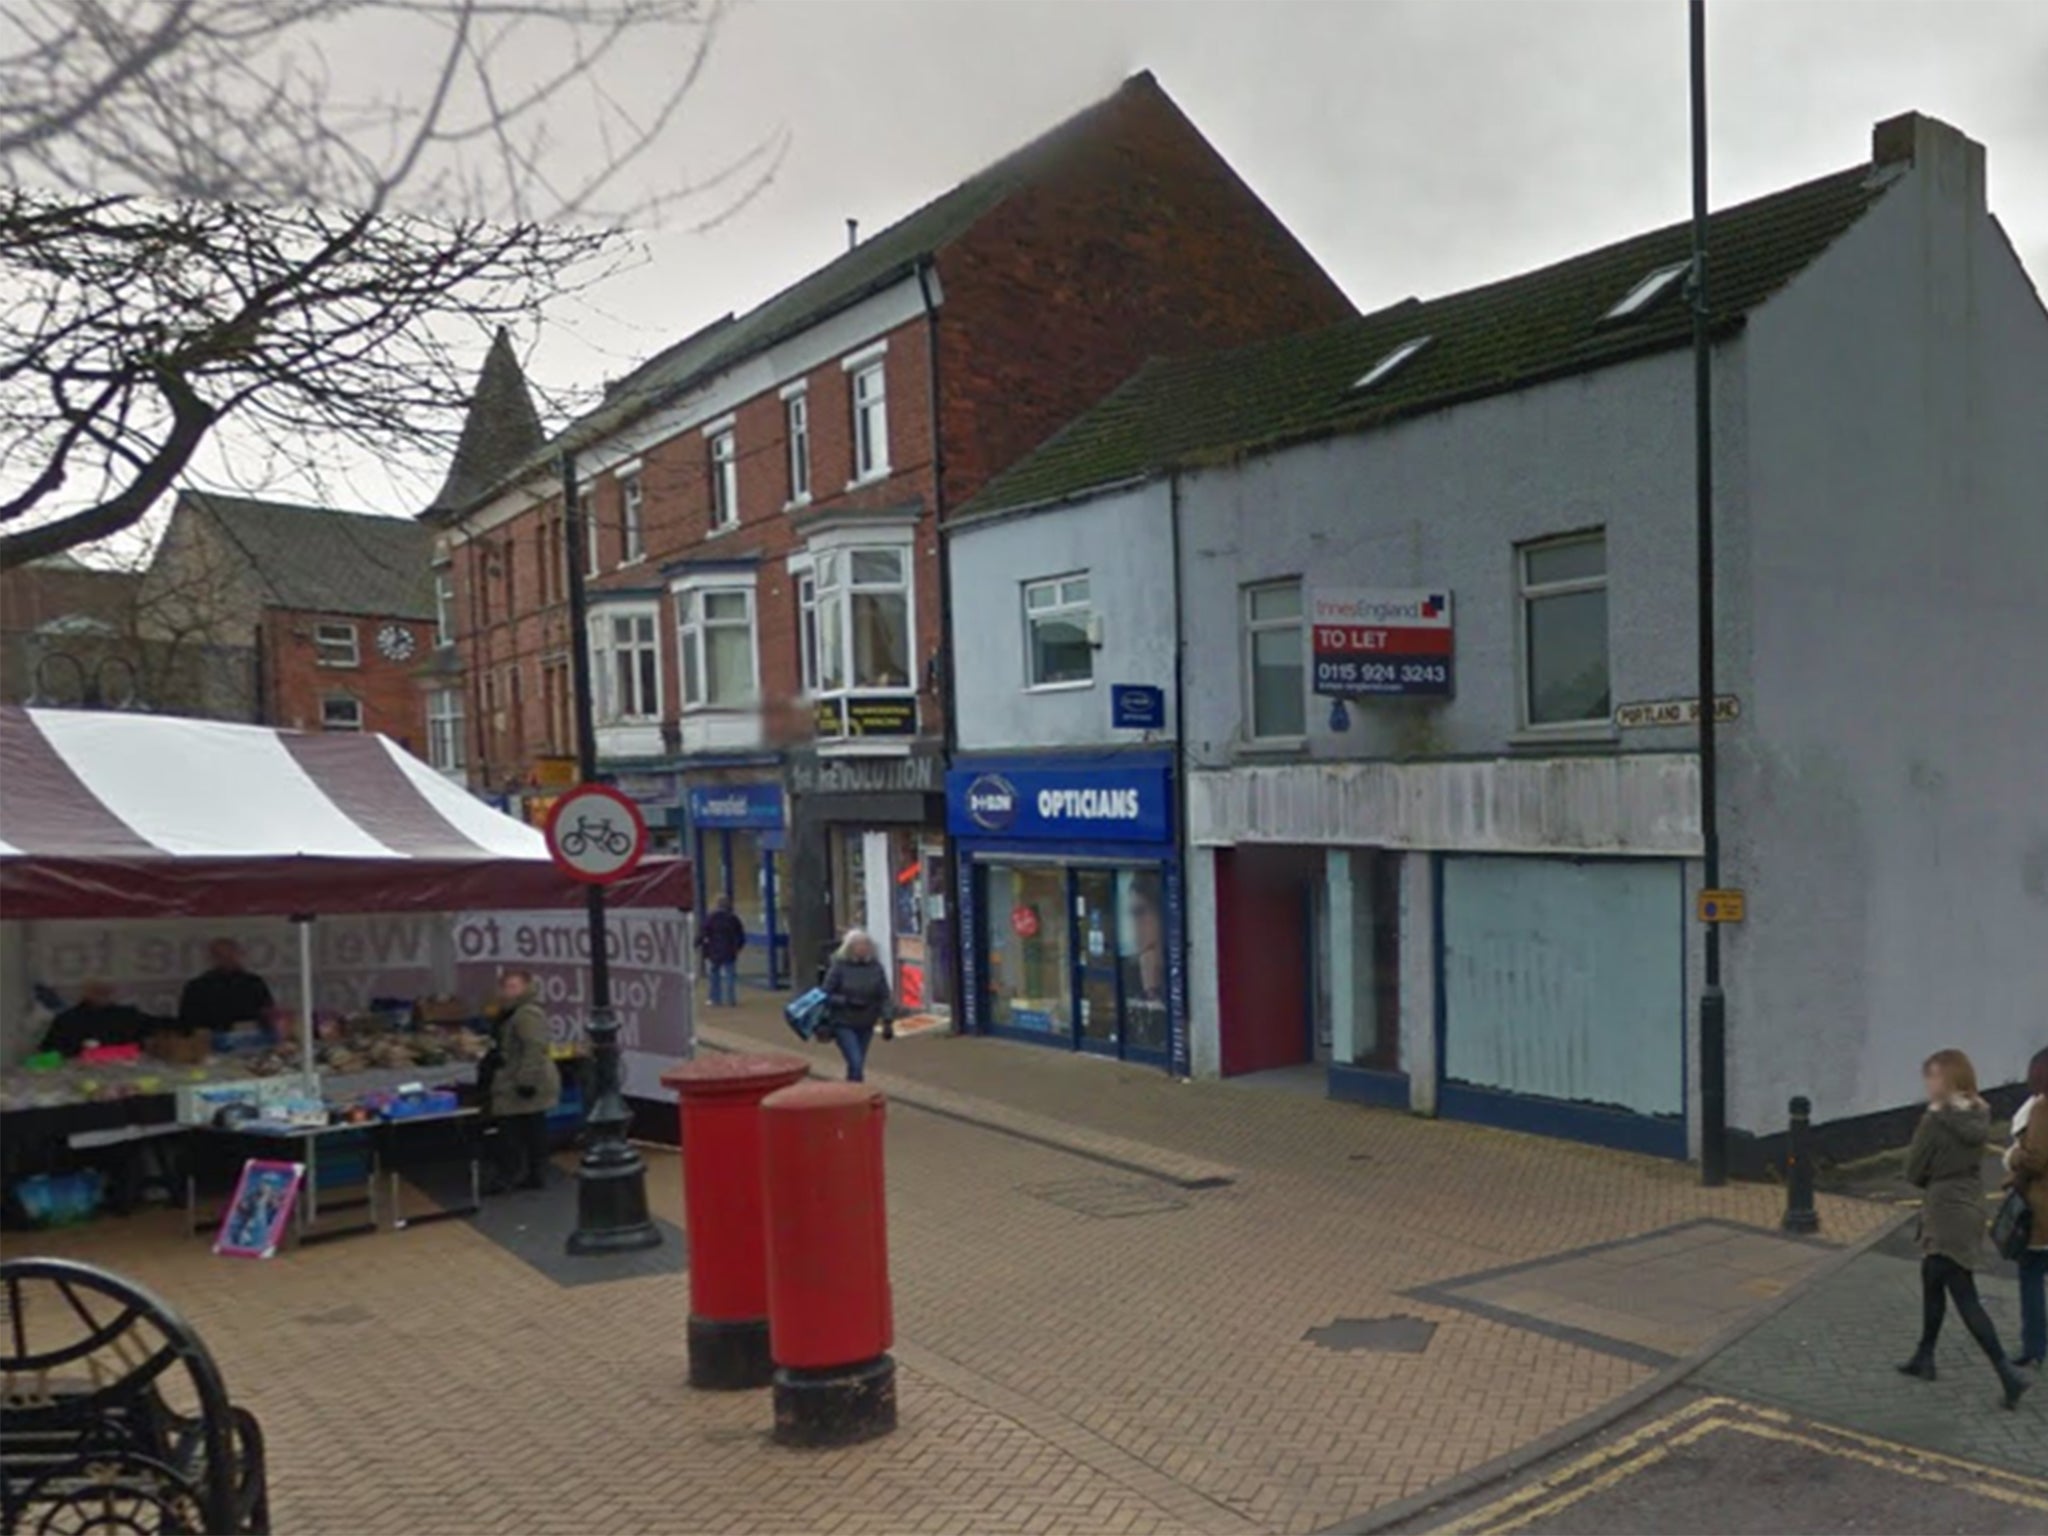 The incident took place in Portland Square in Sutton-in-Ashfield